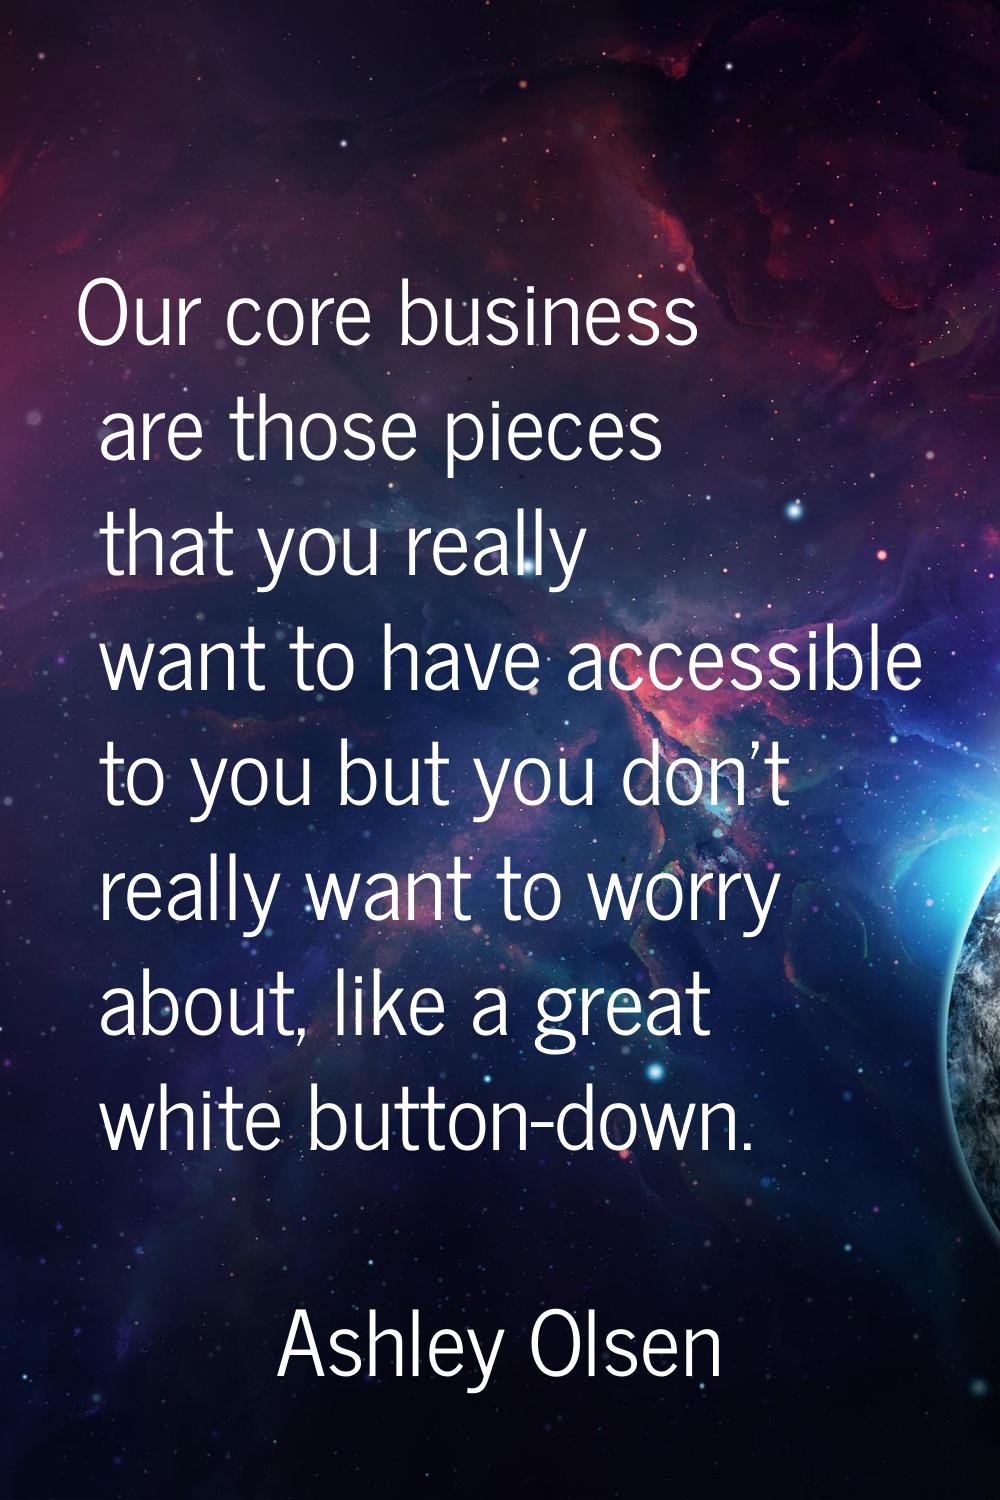 Our core business are those pieces that you really want to have accessible to you but you don't rea